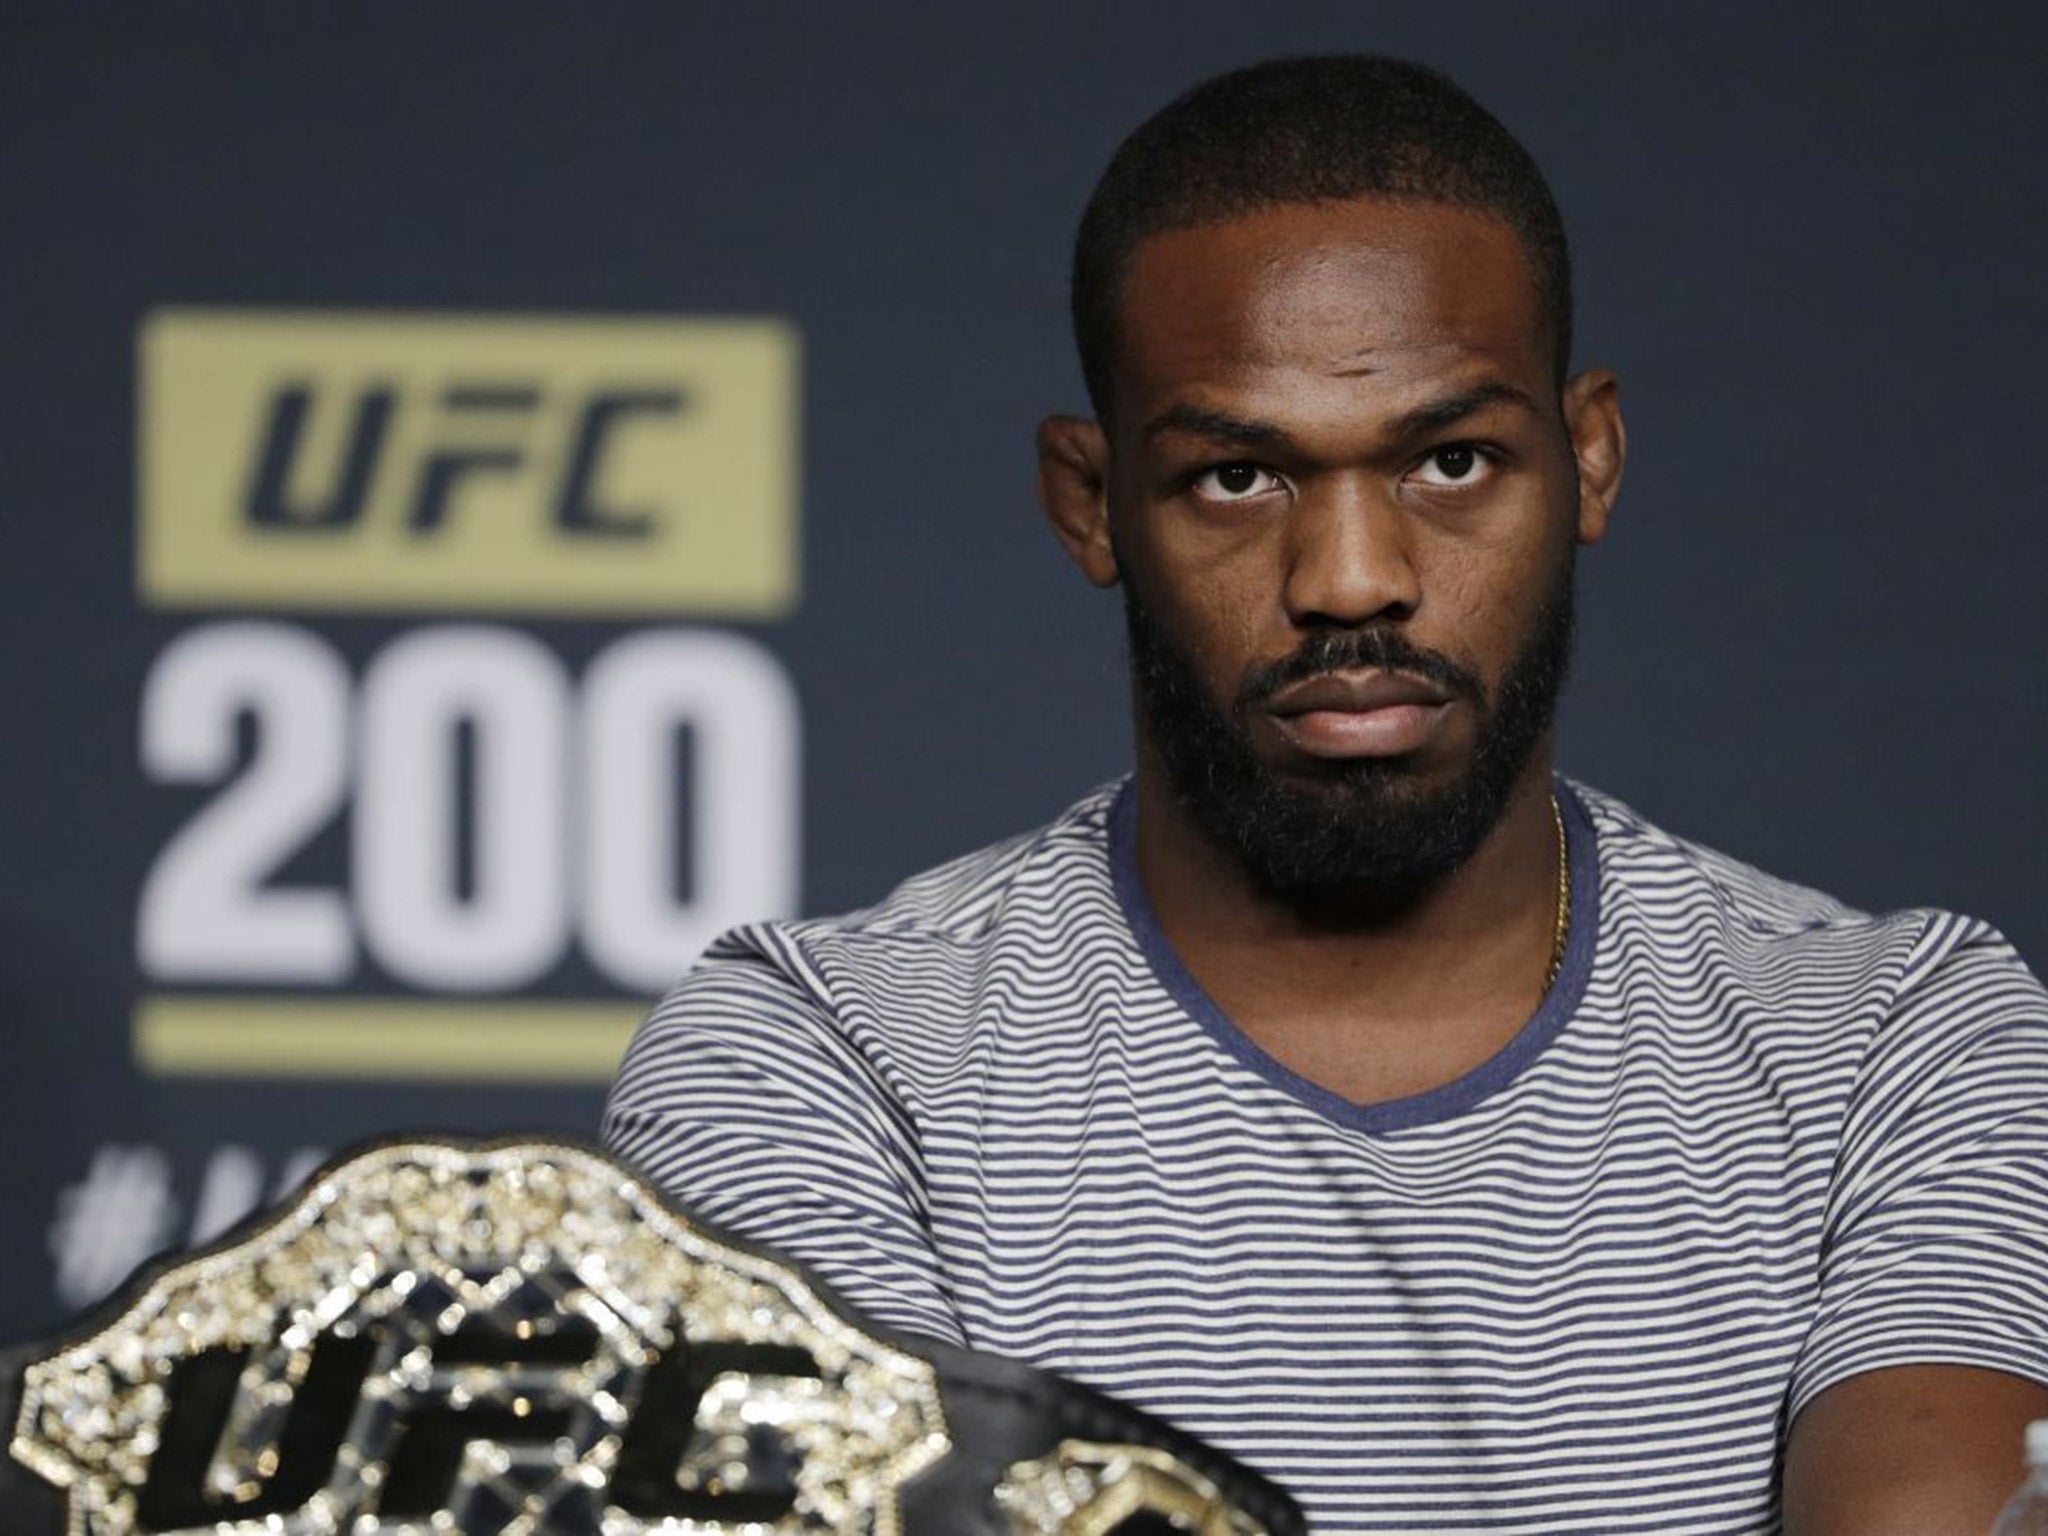 Jon Jones has been pulled from UFC 200 after failing a drugs test